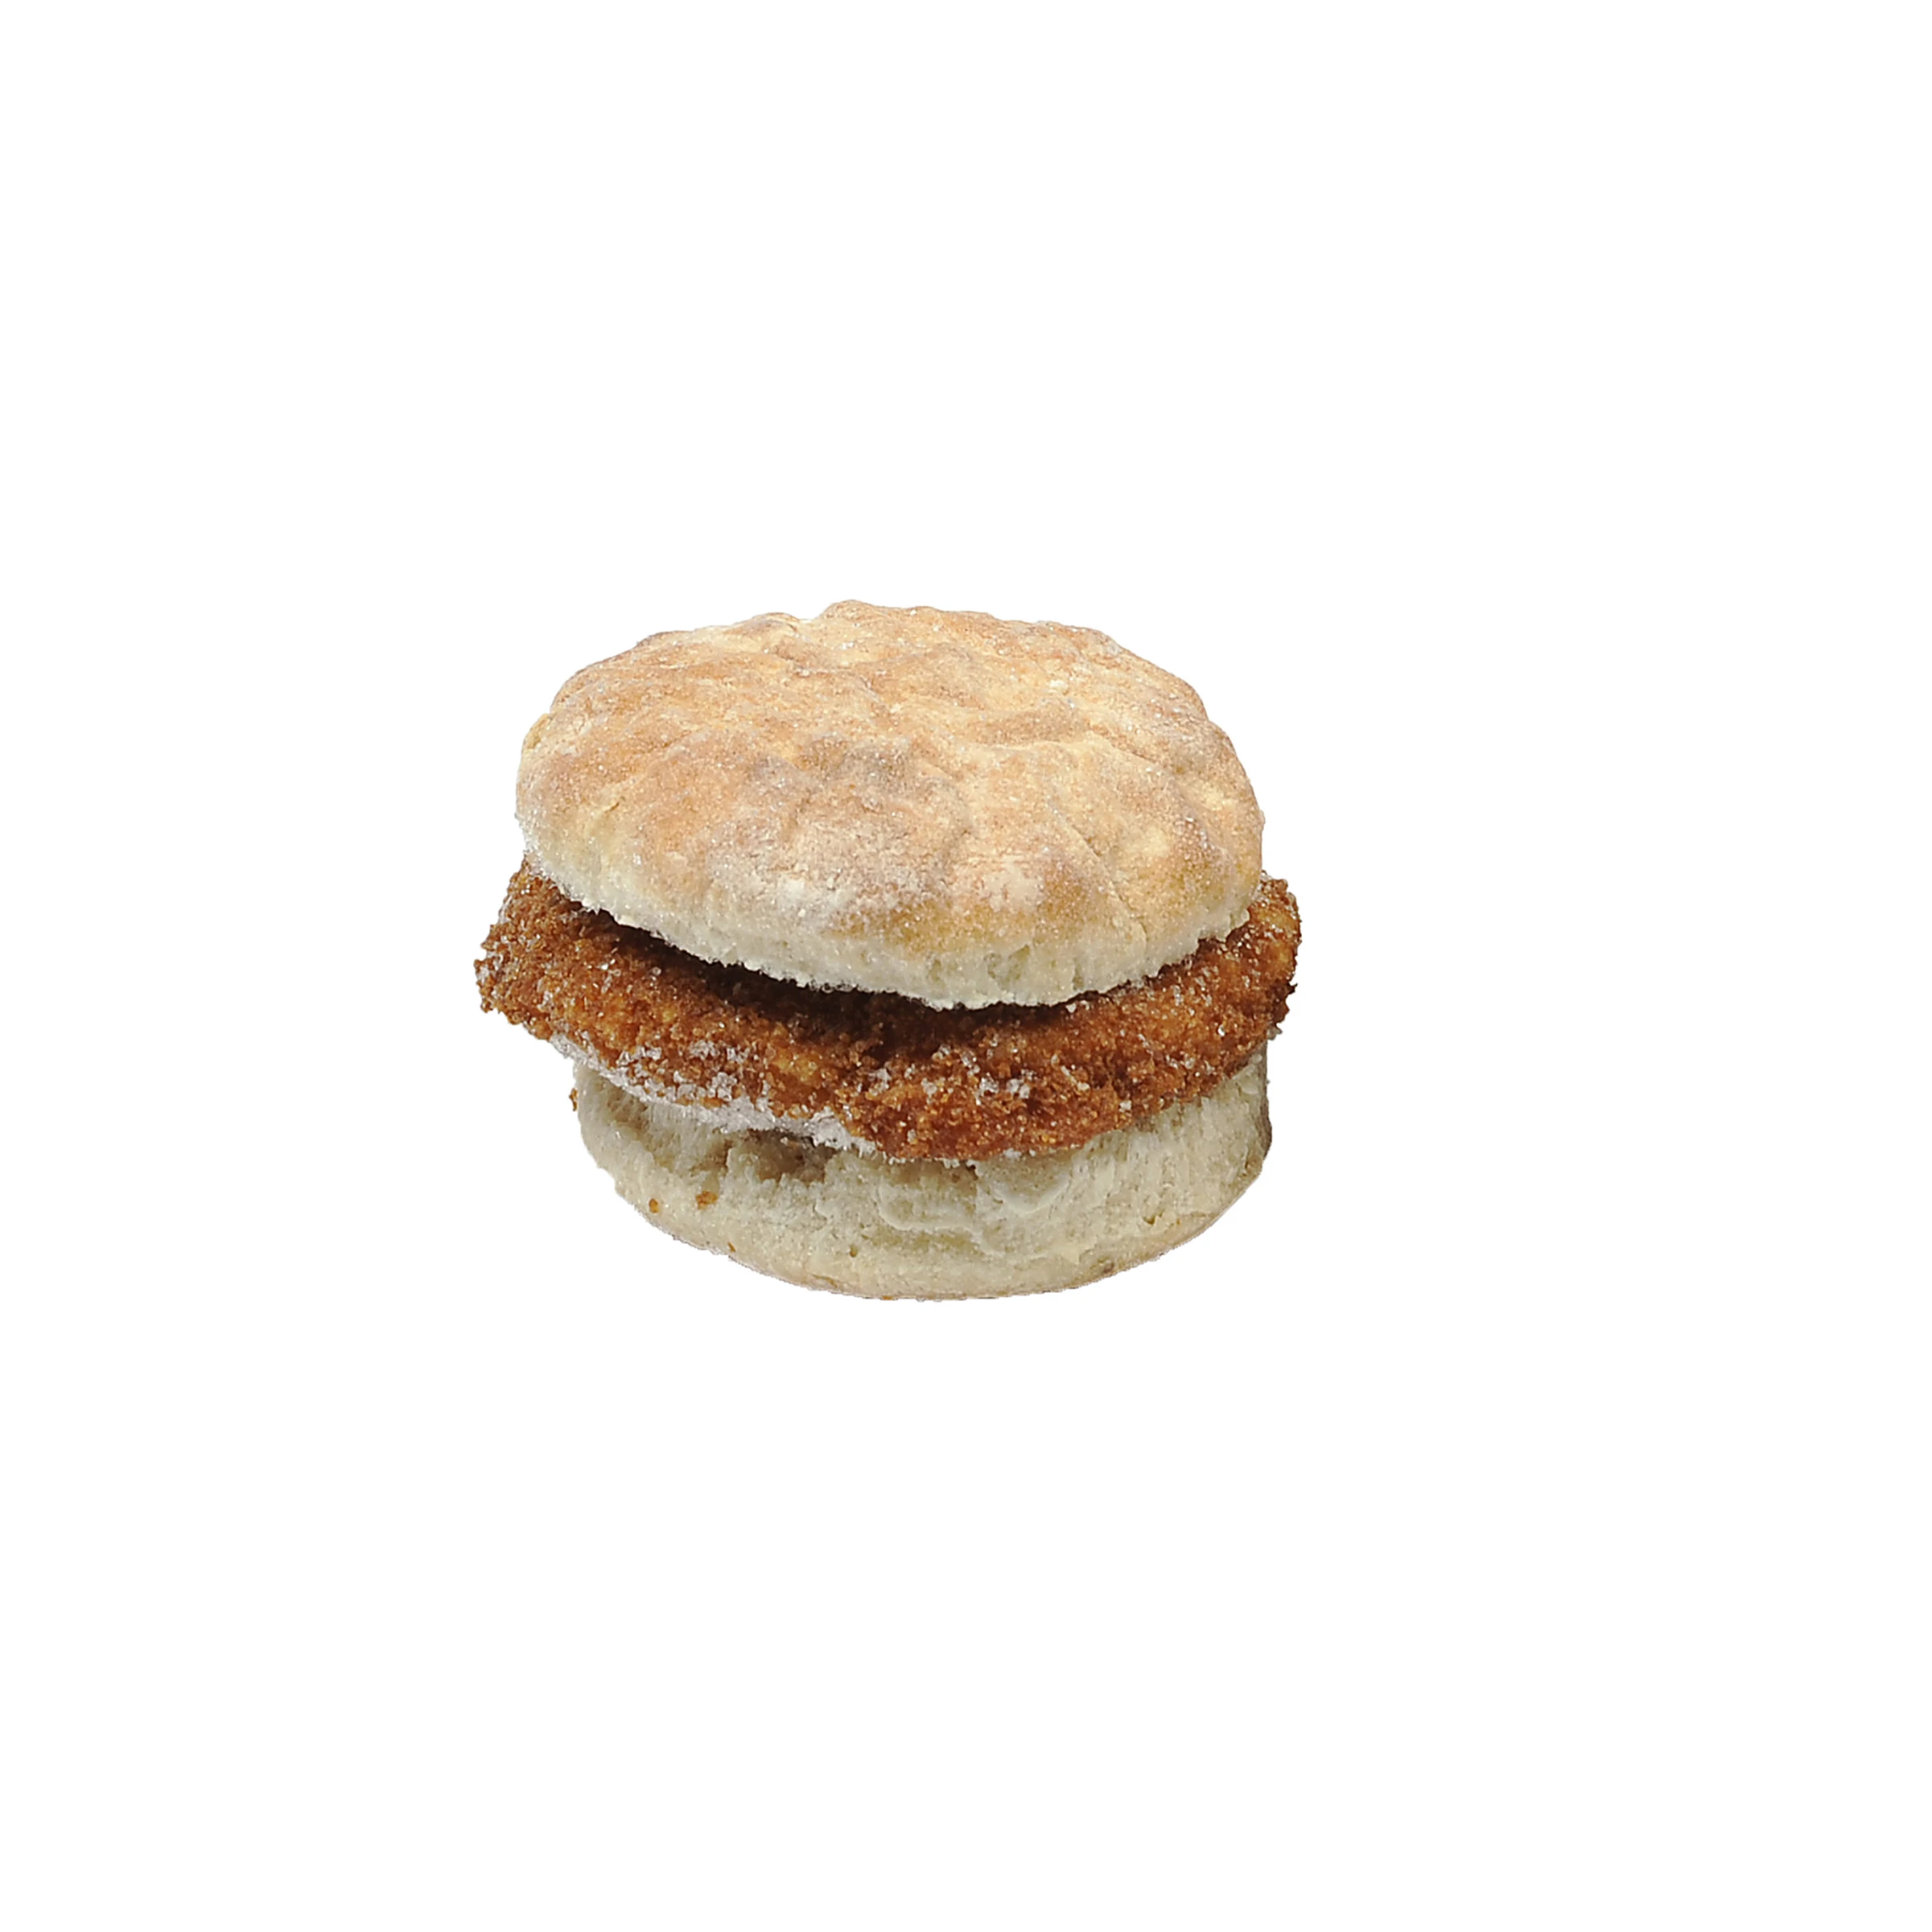 AdvancePierre™ Fully Cooked Breaded Chicken Pattie on a Whole Grain Biscuit, 2.89ozhttp://images.salsify.com/image/upload/s--1qdHKBeB--/e6una71gswslqyn17ij4.webp